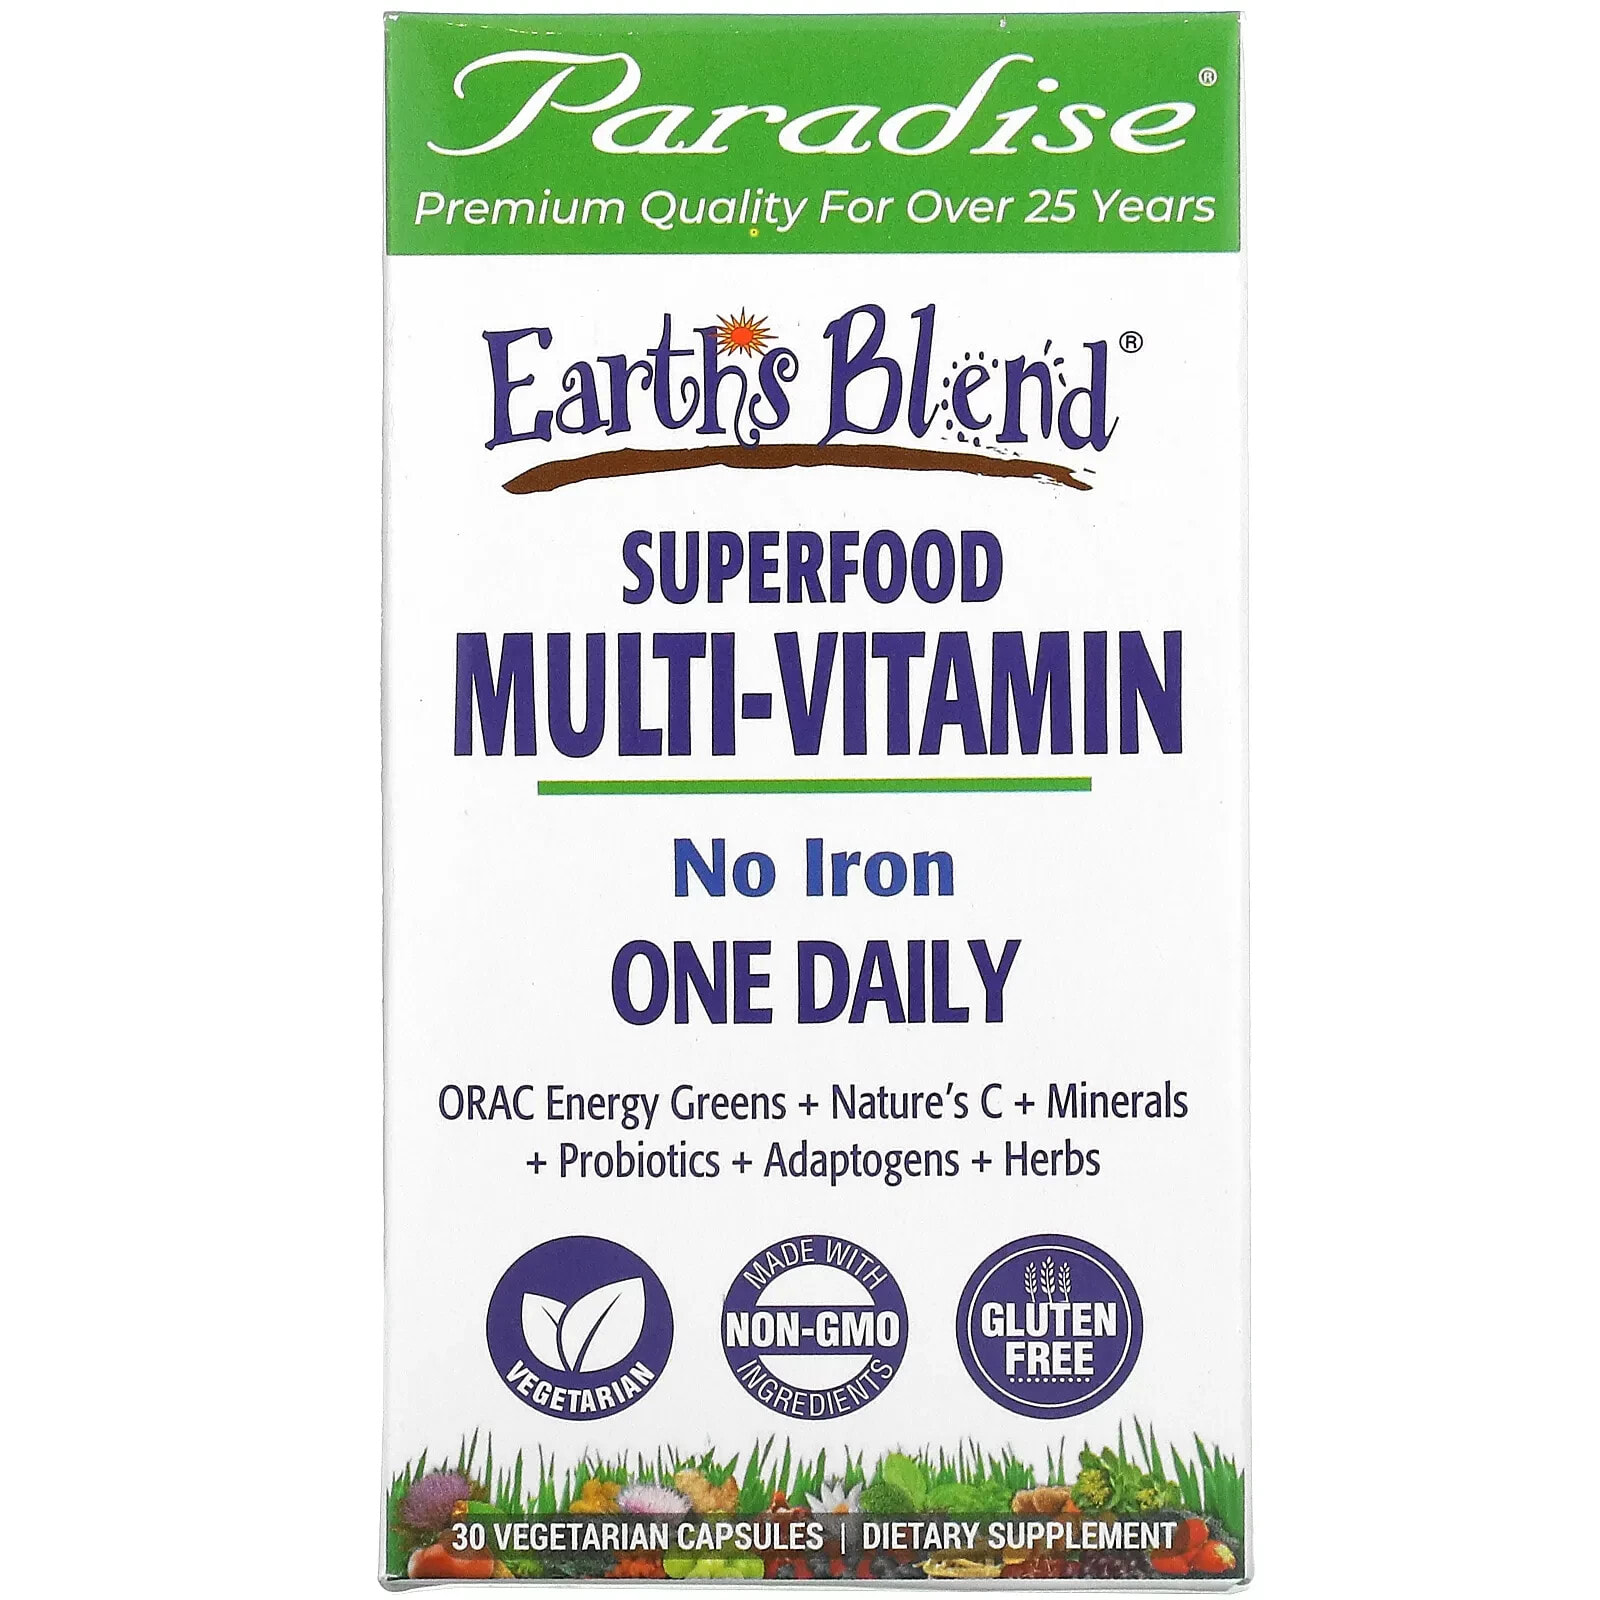 Earth's Blend, One Daily Superfood Multi-Vitamin, No Iron, 60 Vegetarian Capsules